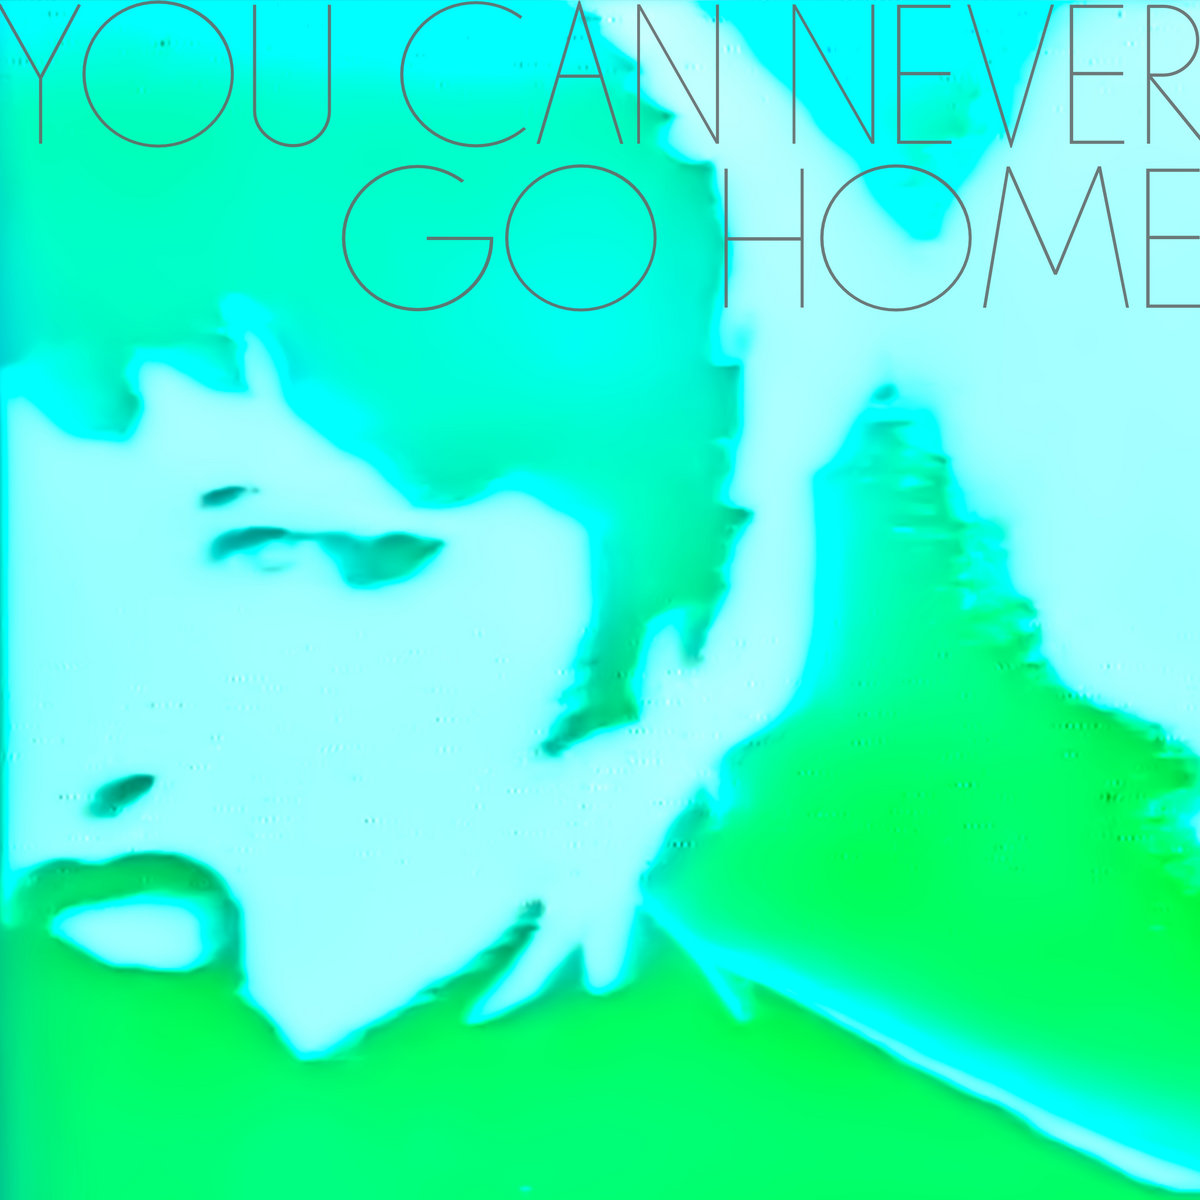 Electro News @ – Ghost Cop – You Can Never Go Home